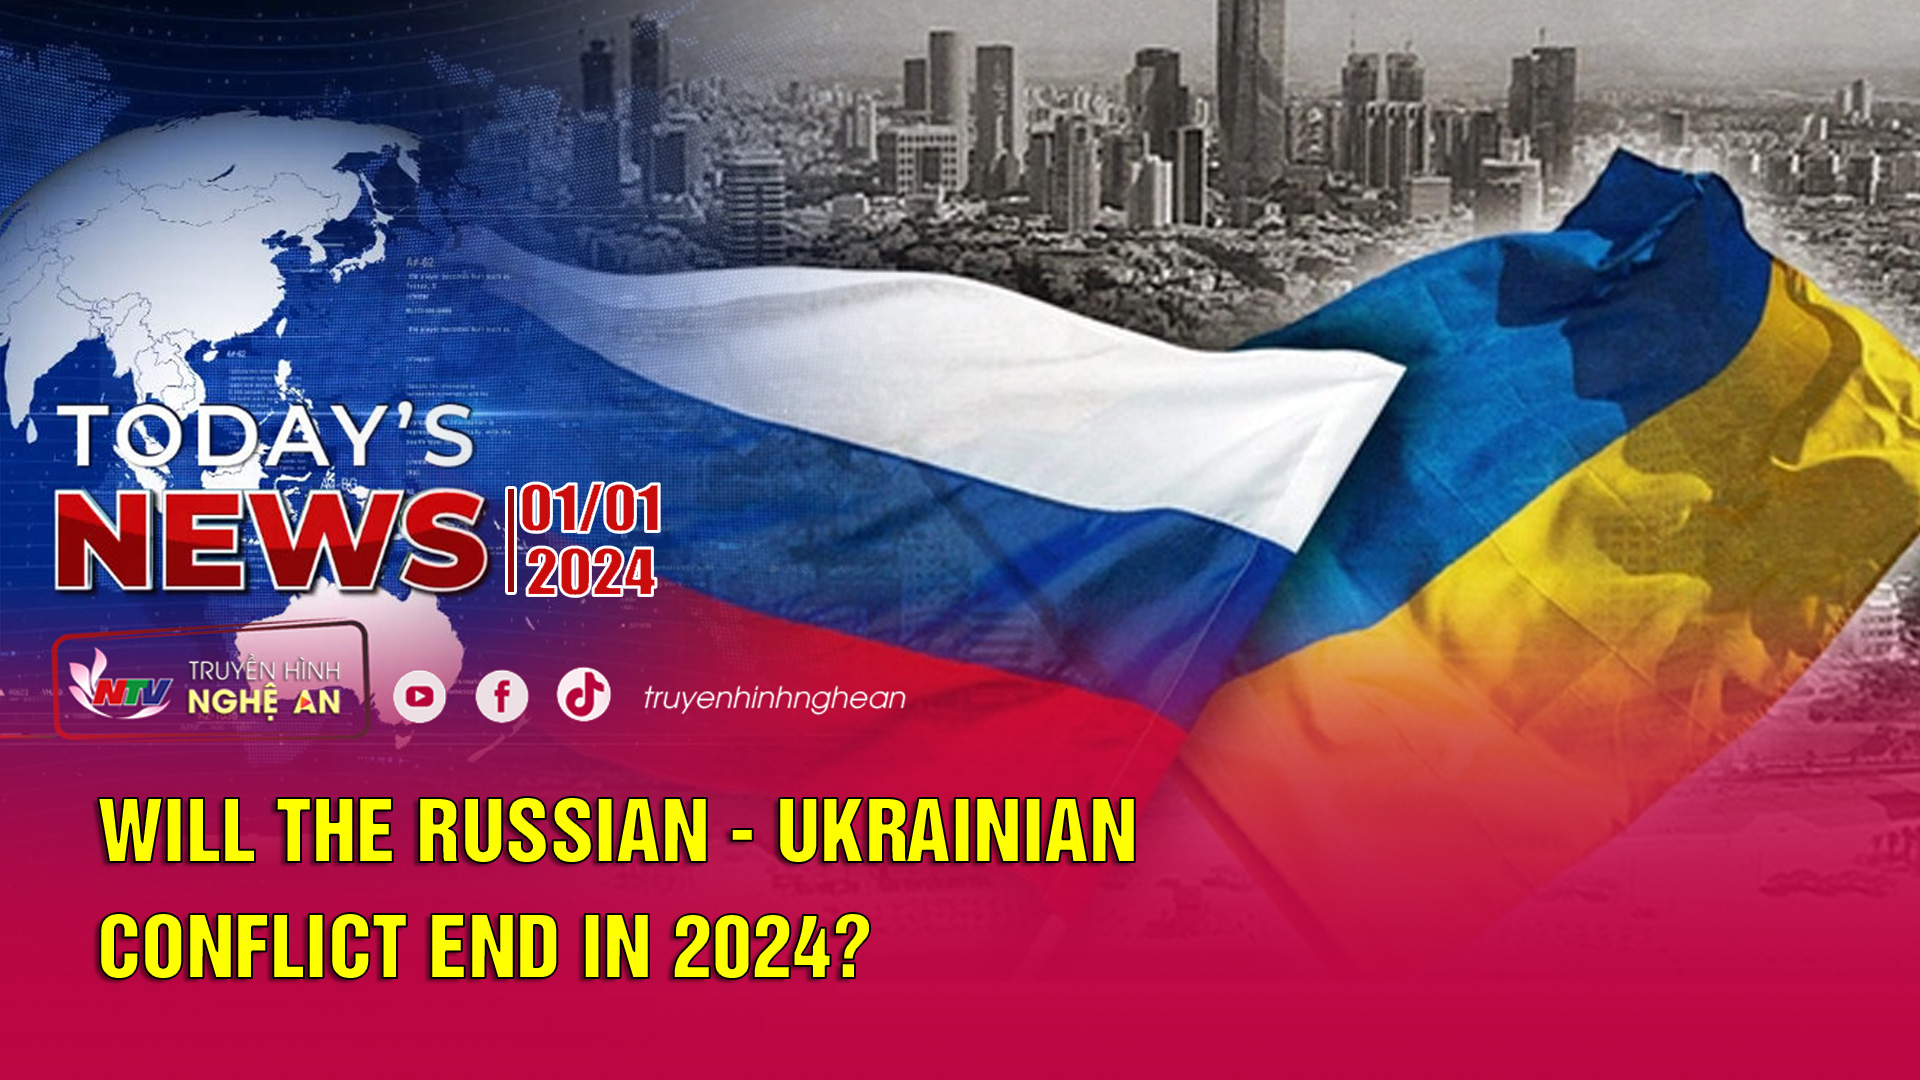 Today's News - 01/01/2024: Will the Russian - Ukrainian conflict end in 2024?